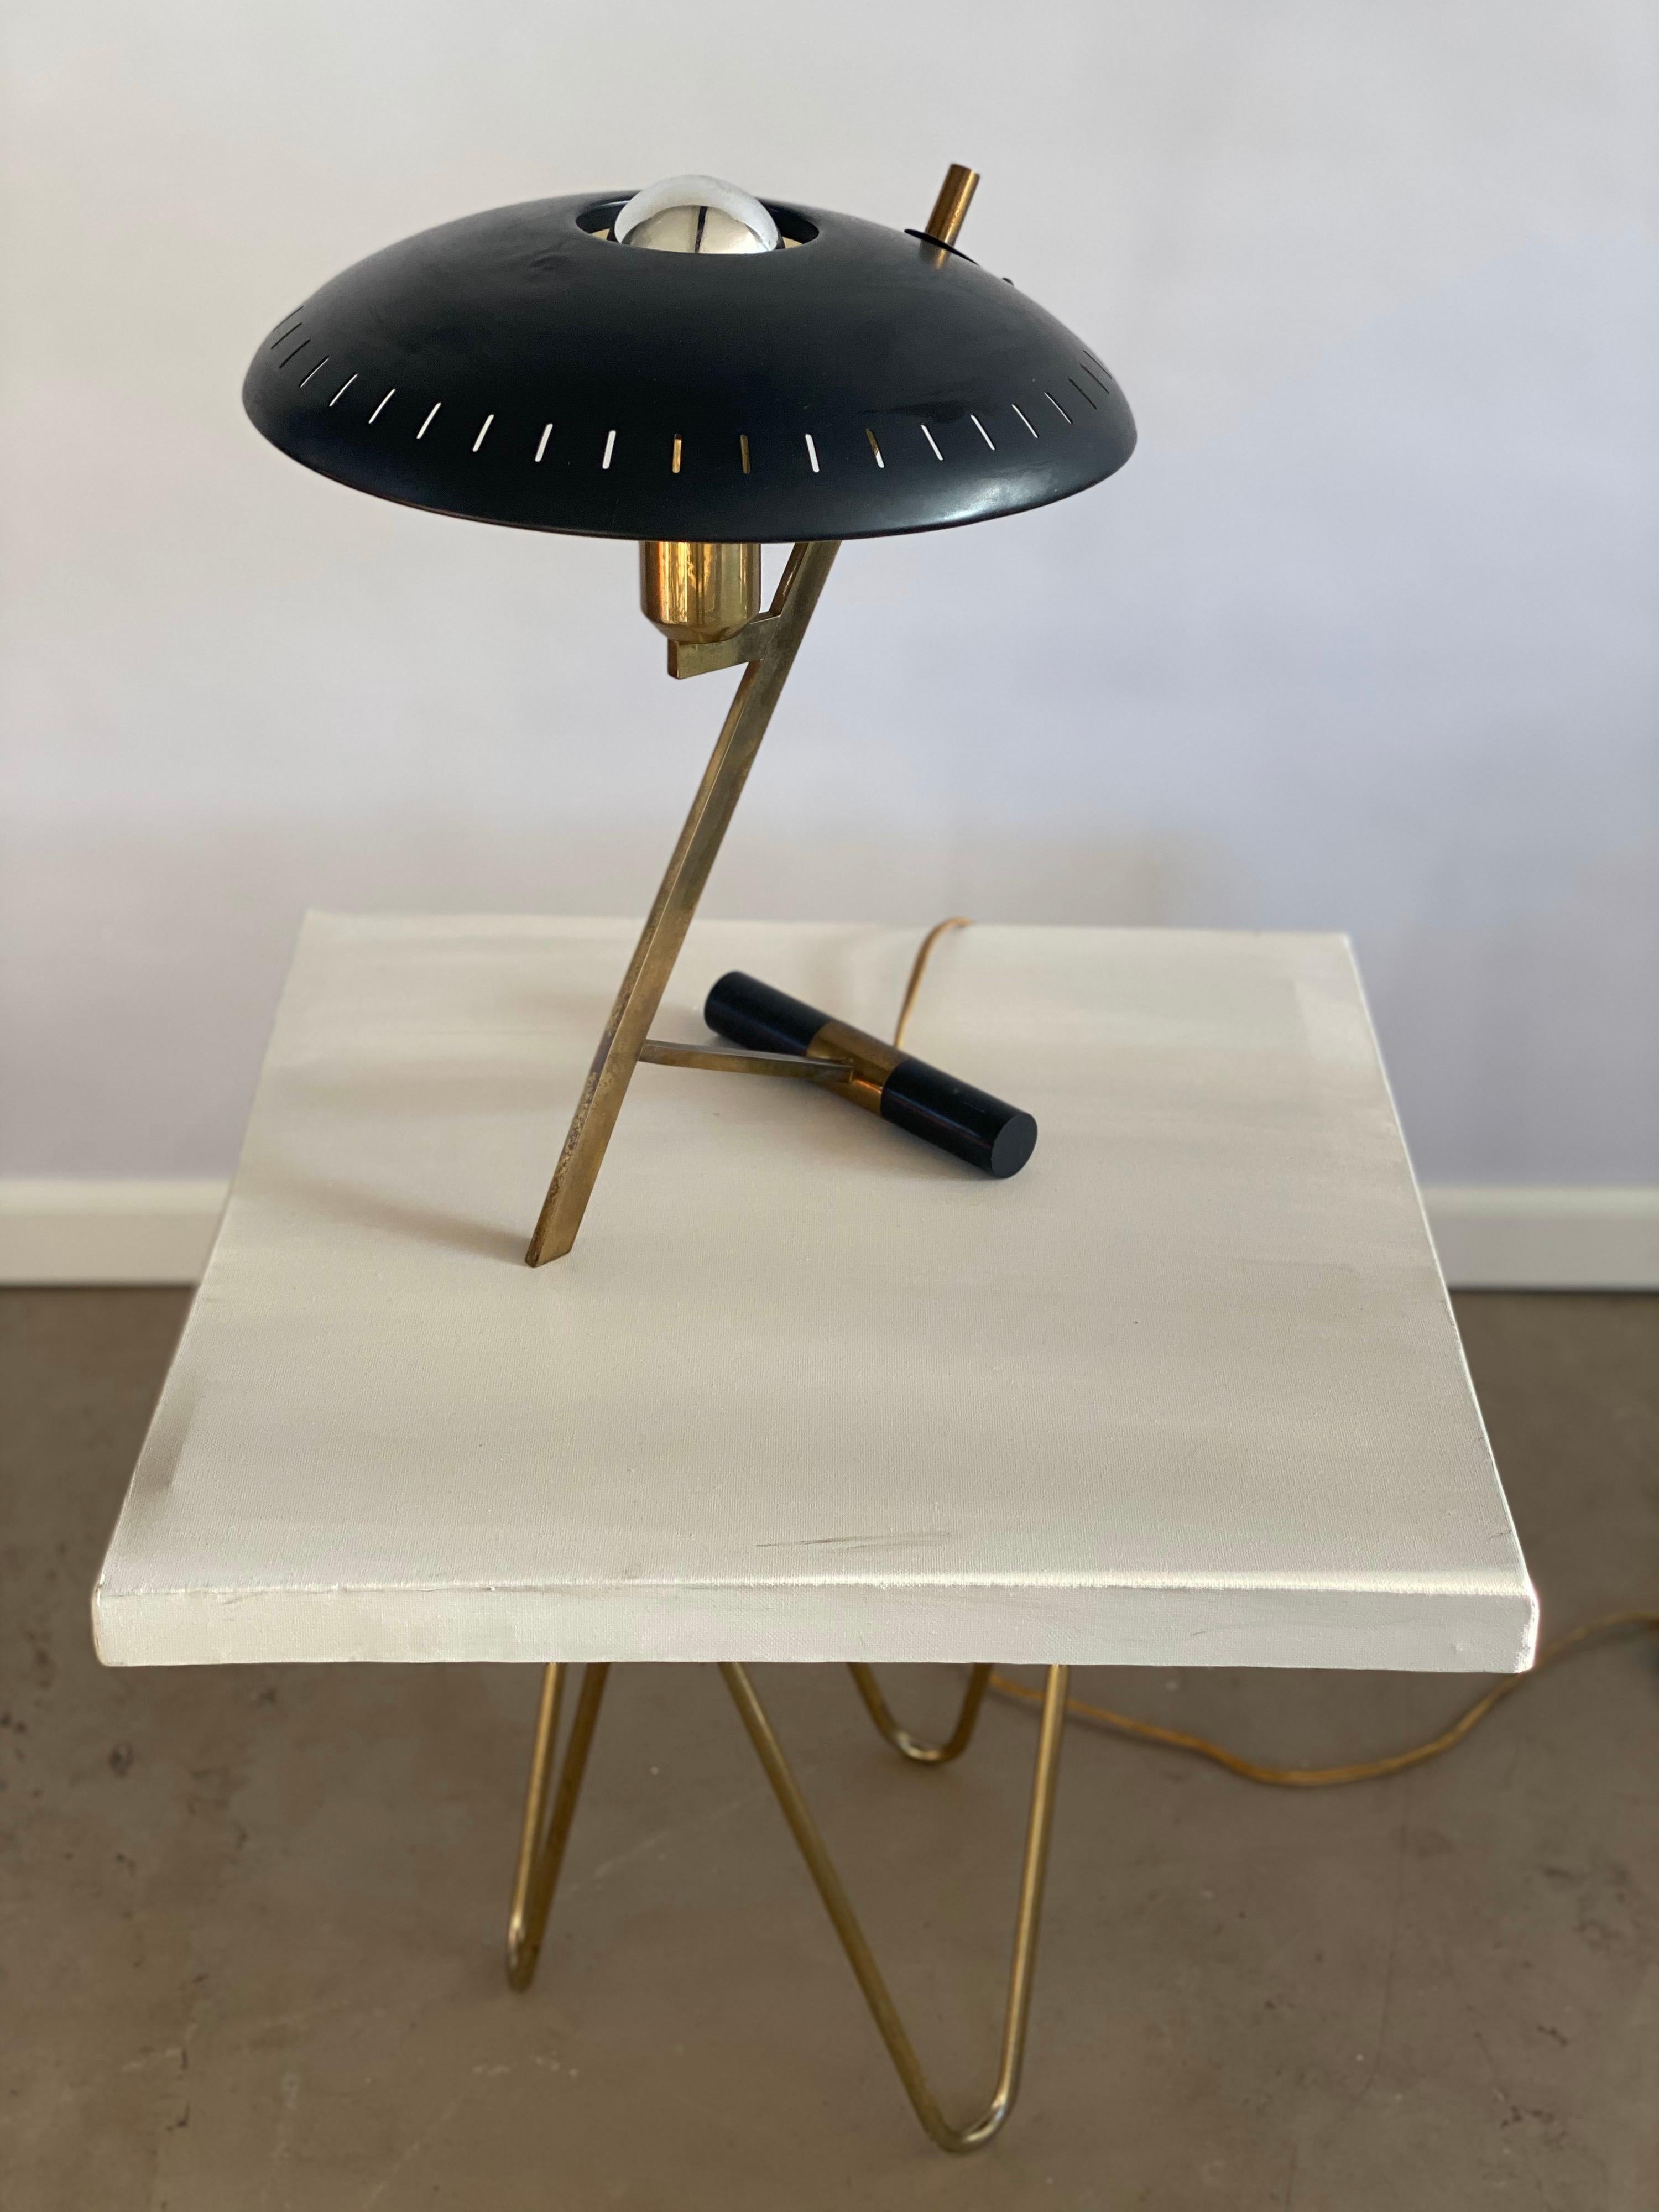 Two identical available. Beautiful iconic design by Louis Kalff for the renowned Dutch firm Philips, mid-1950s. This is the first edition with a brass frame and the black disk-shaped perforated black lacquered shade. The shade is the miniature of